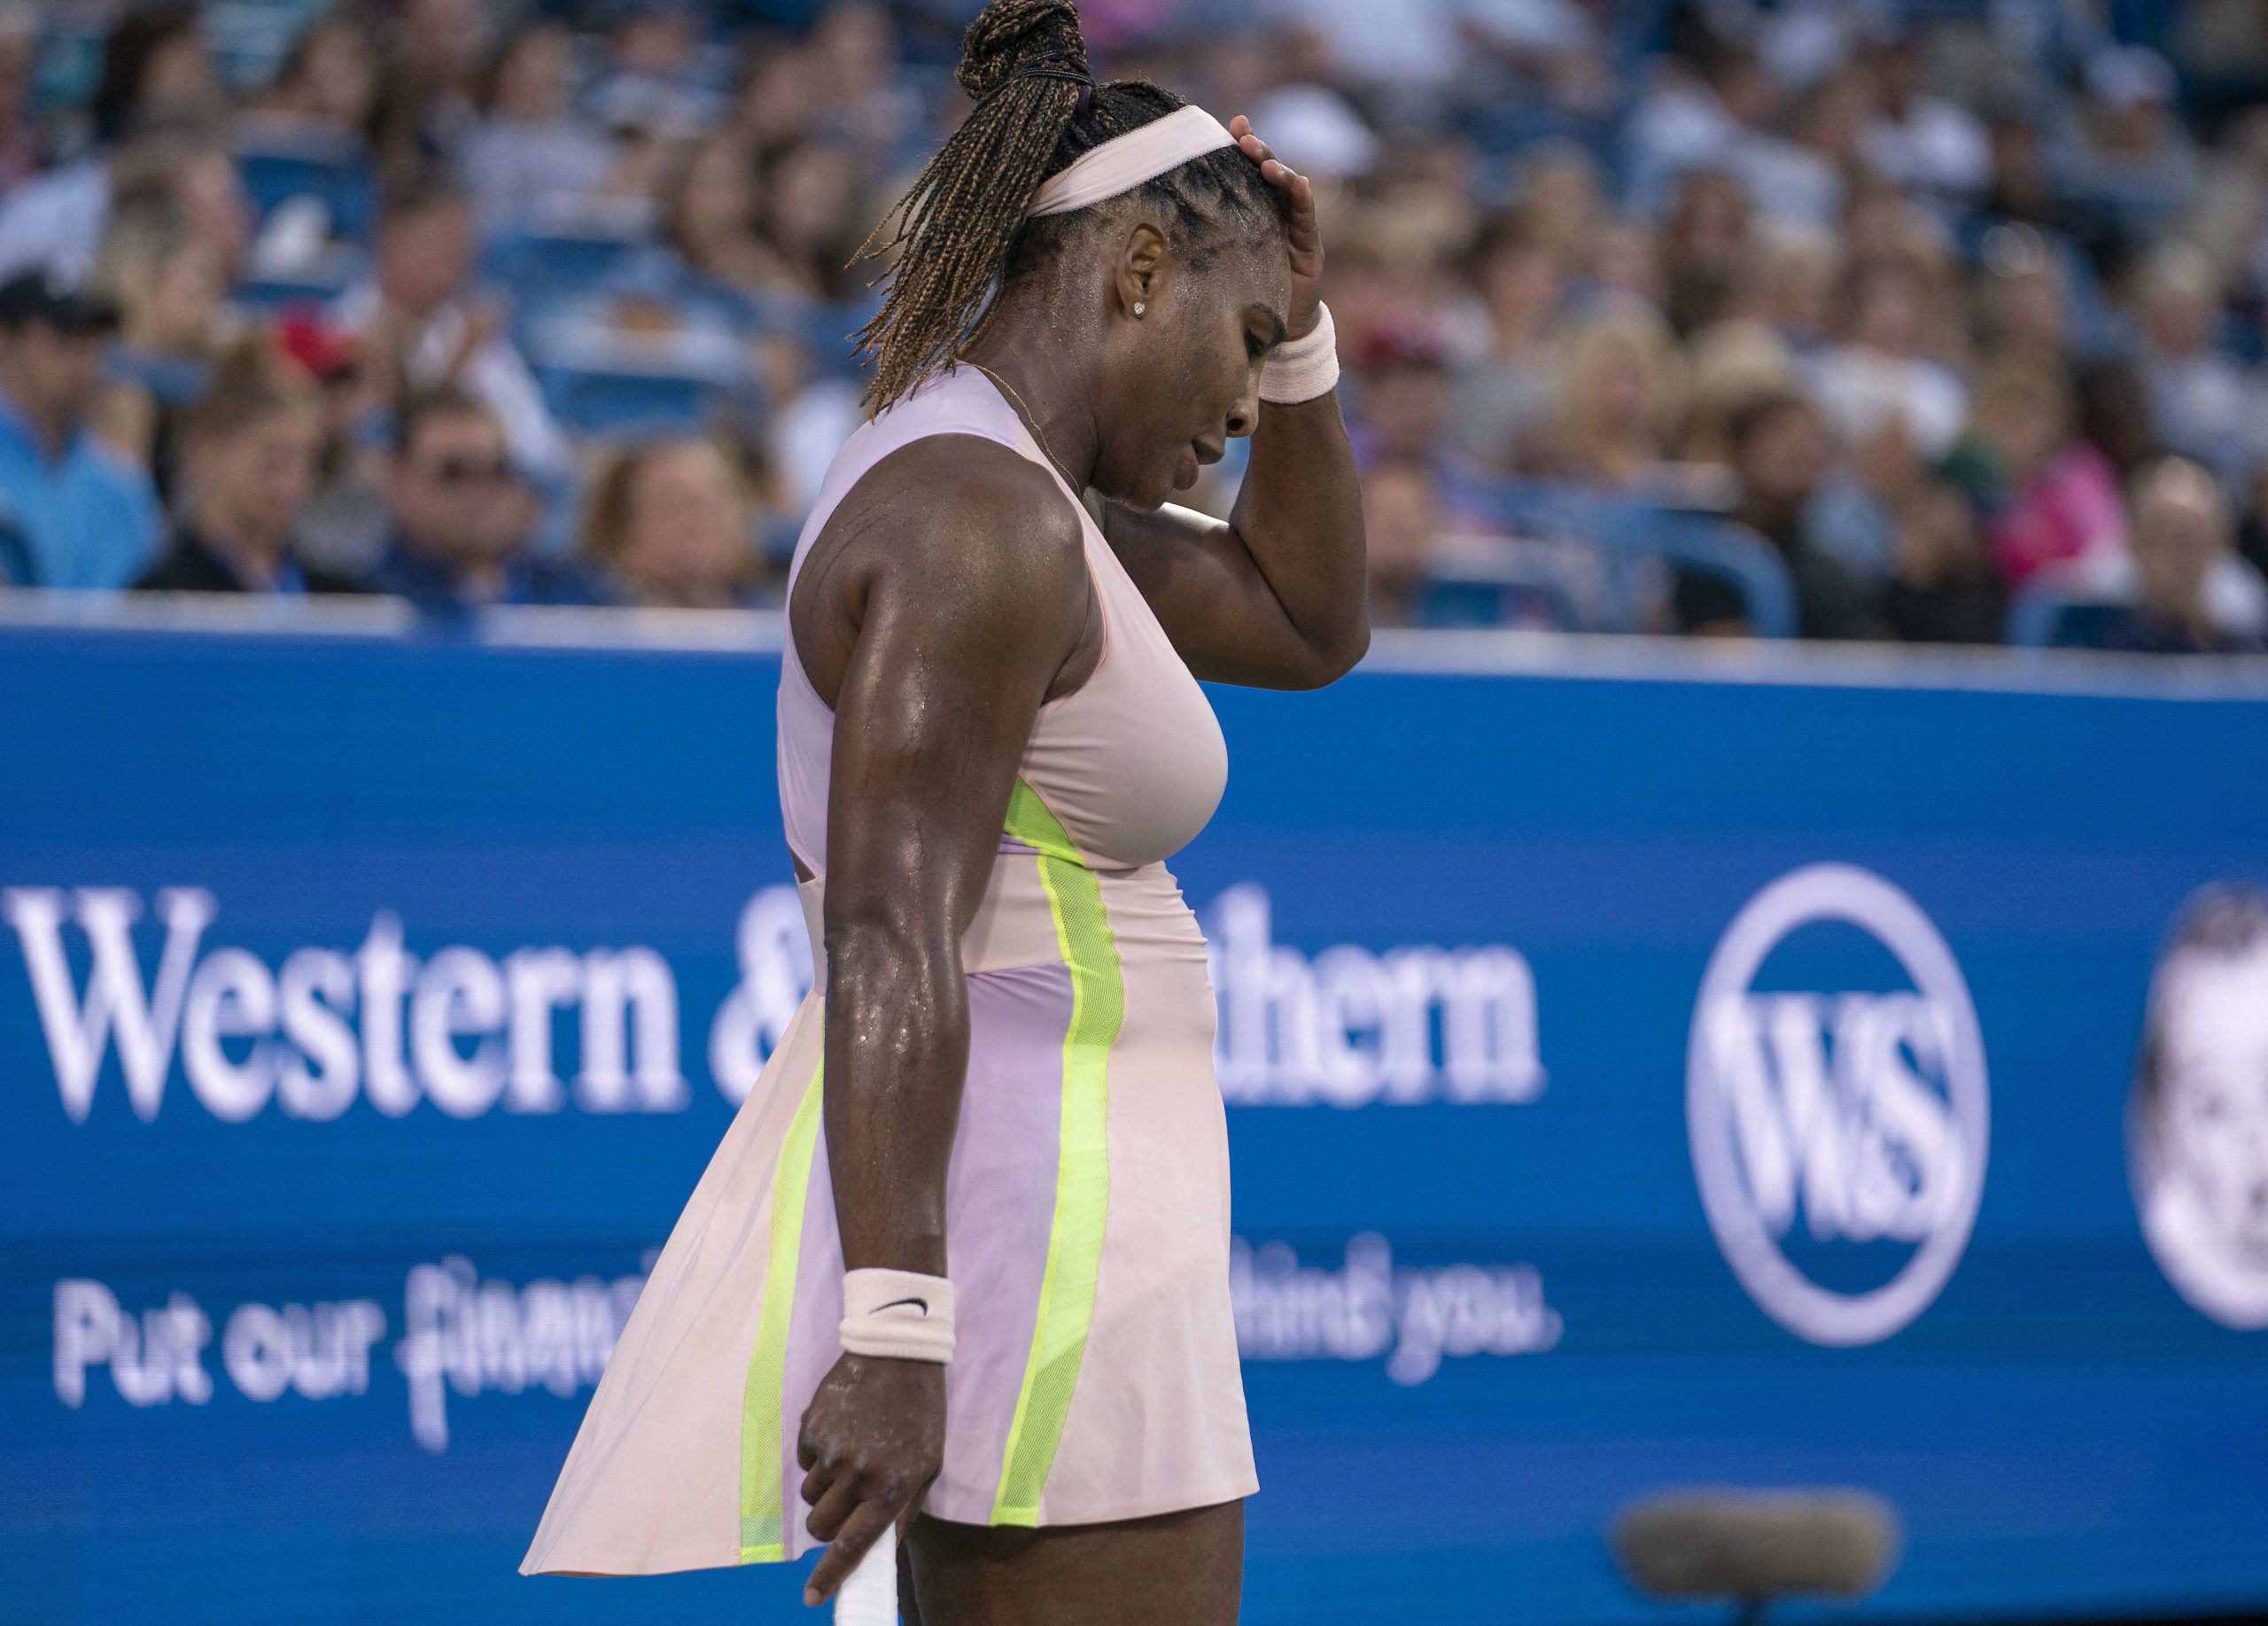 Serena Willams (USA) reacts to a point in her match against Emma Raducanu (GBR) at the Western & Southern Open at the at the Lindner Family Tennis Center.